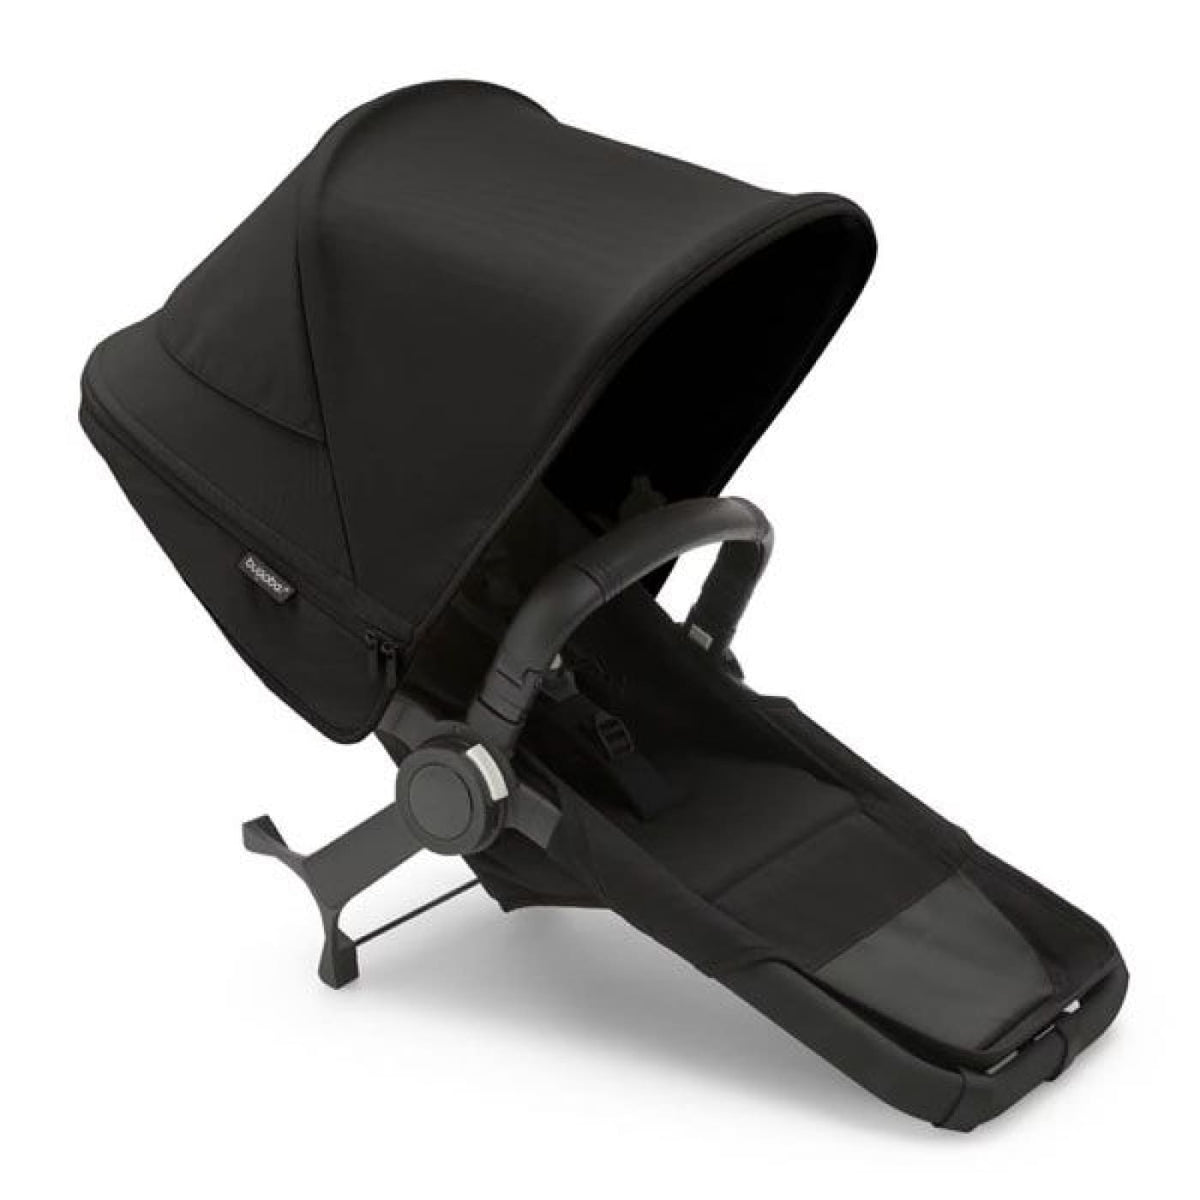 Bugaboo Donkey 5 Duo Extension Complete - Midnight Black - PRAMS &amp; STROLLERS - TODDLER SEATS/CONVERSION KITS